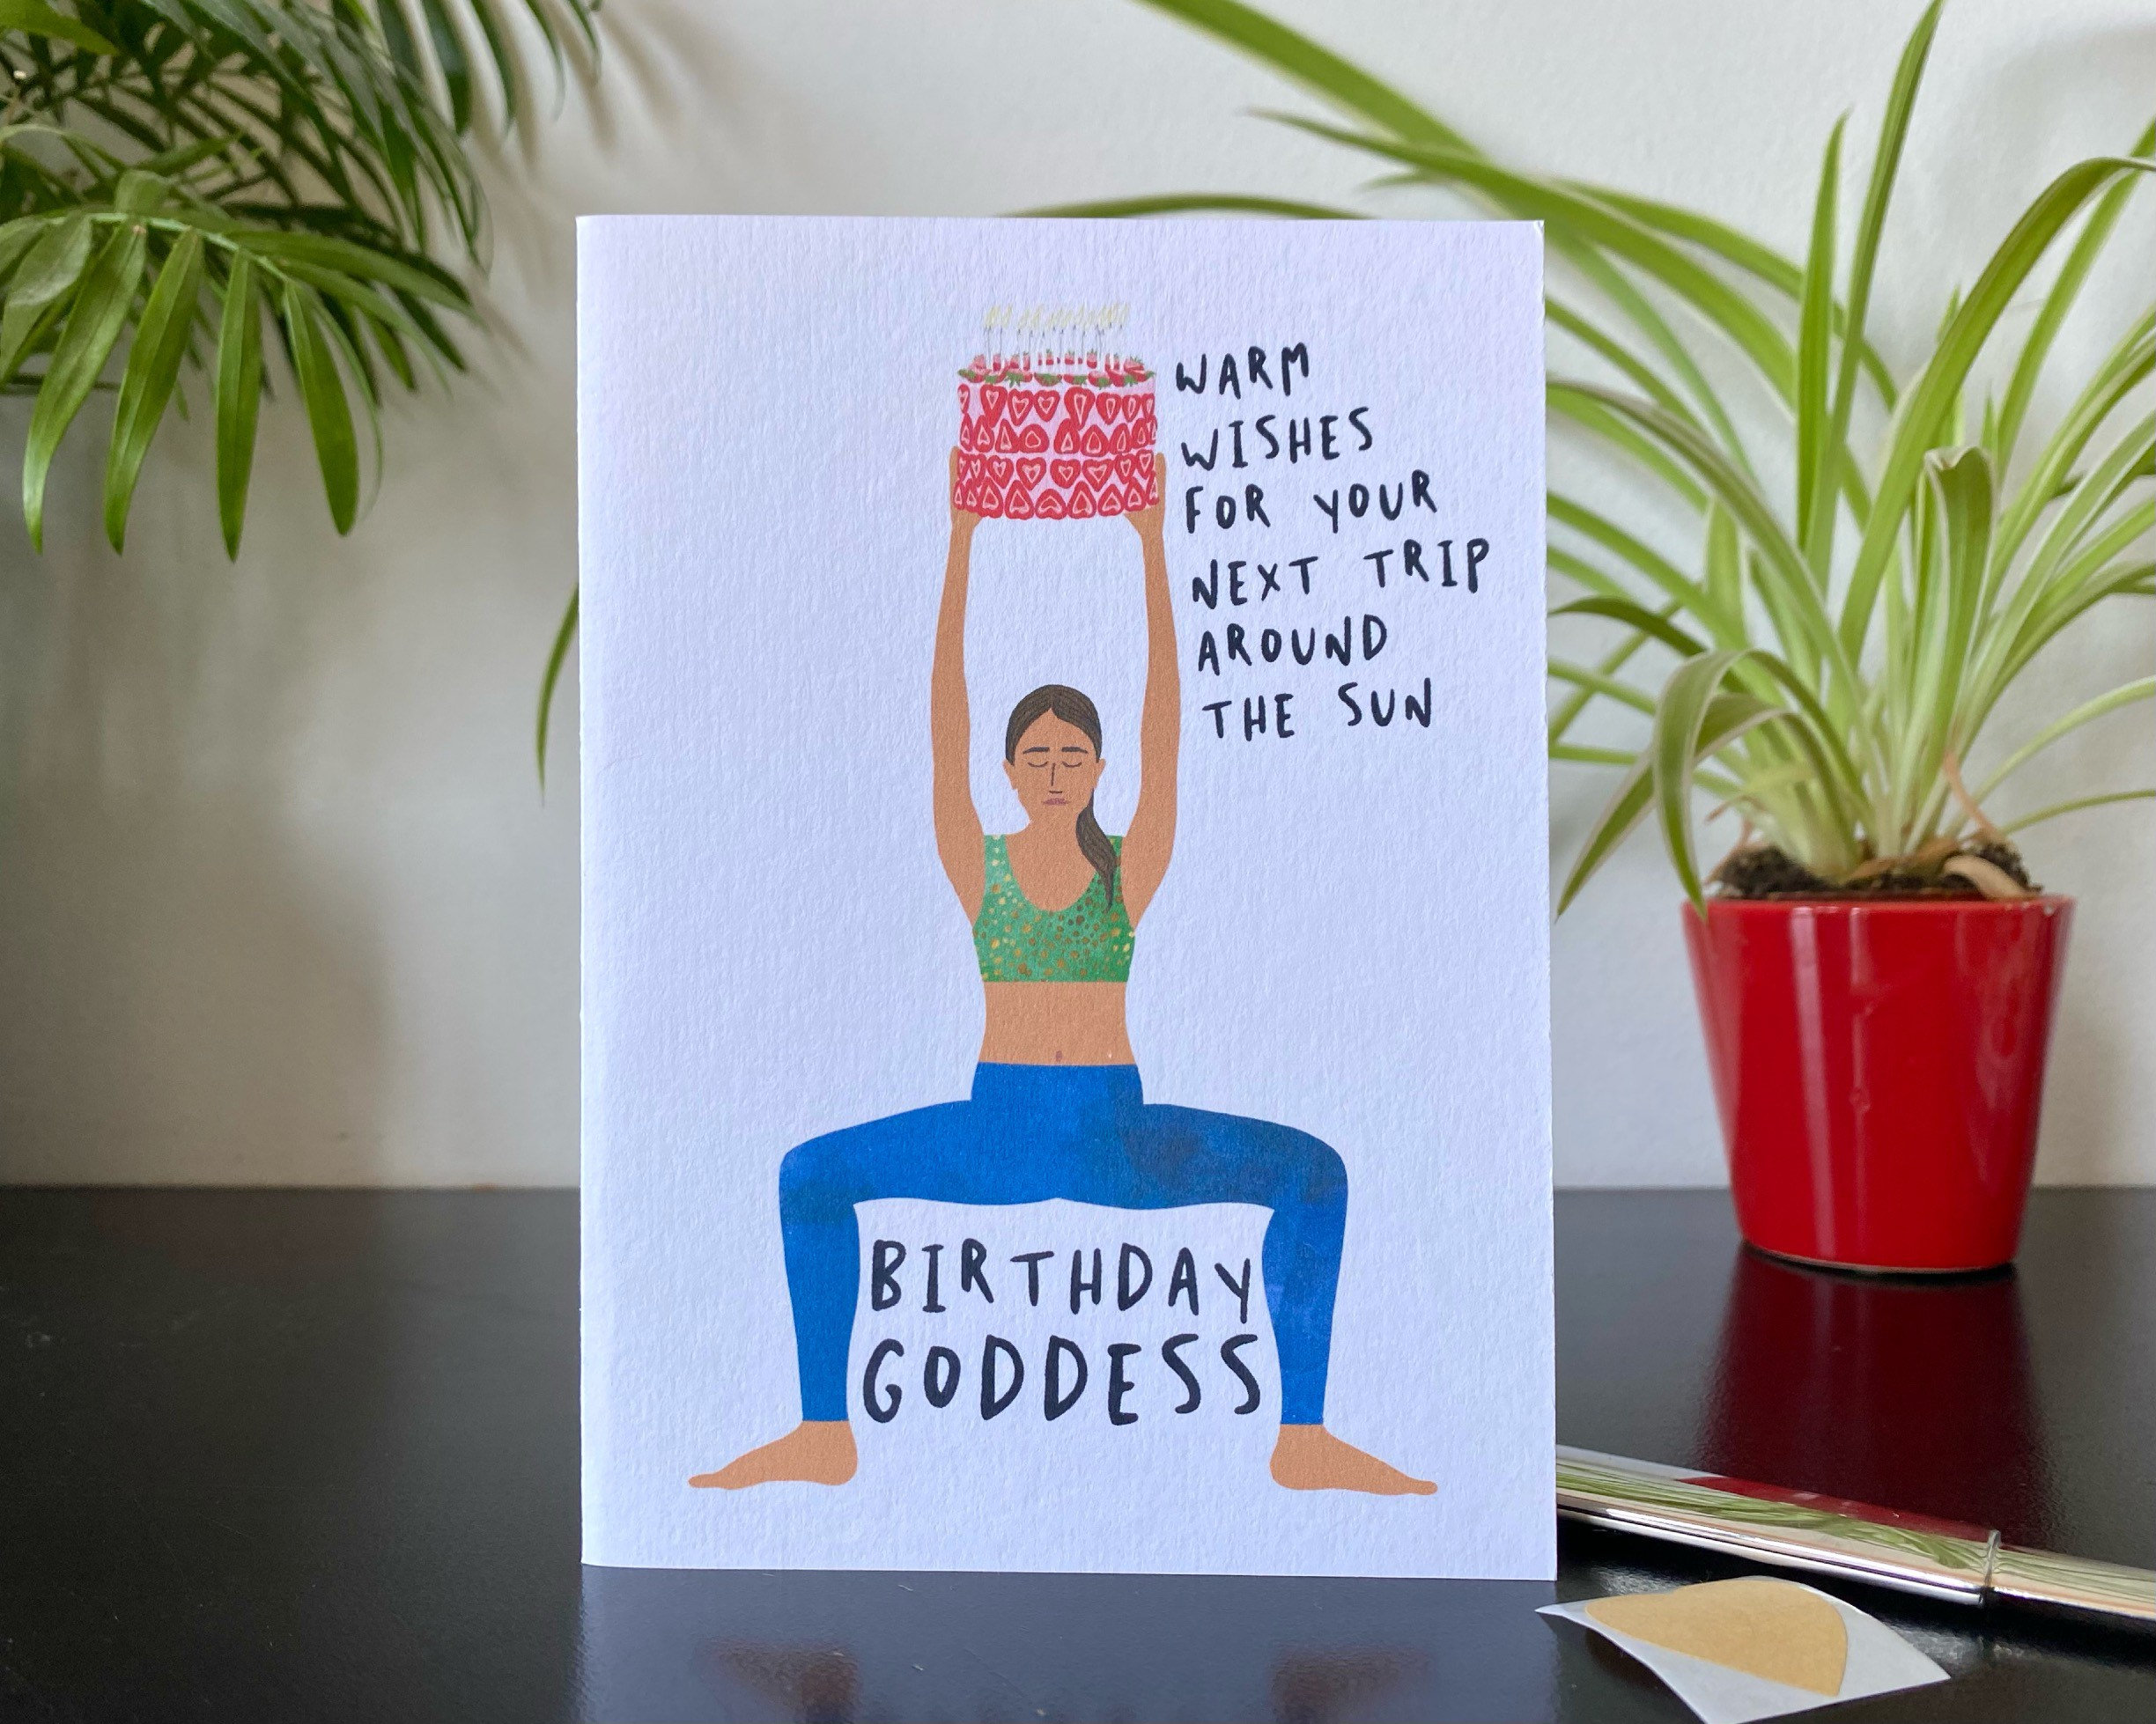 Birthday Goddess Pose Warm Wishes for Your Next Trip Around the Sun Yoga  Greetings Card Handmade A6 Recyclable 